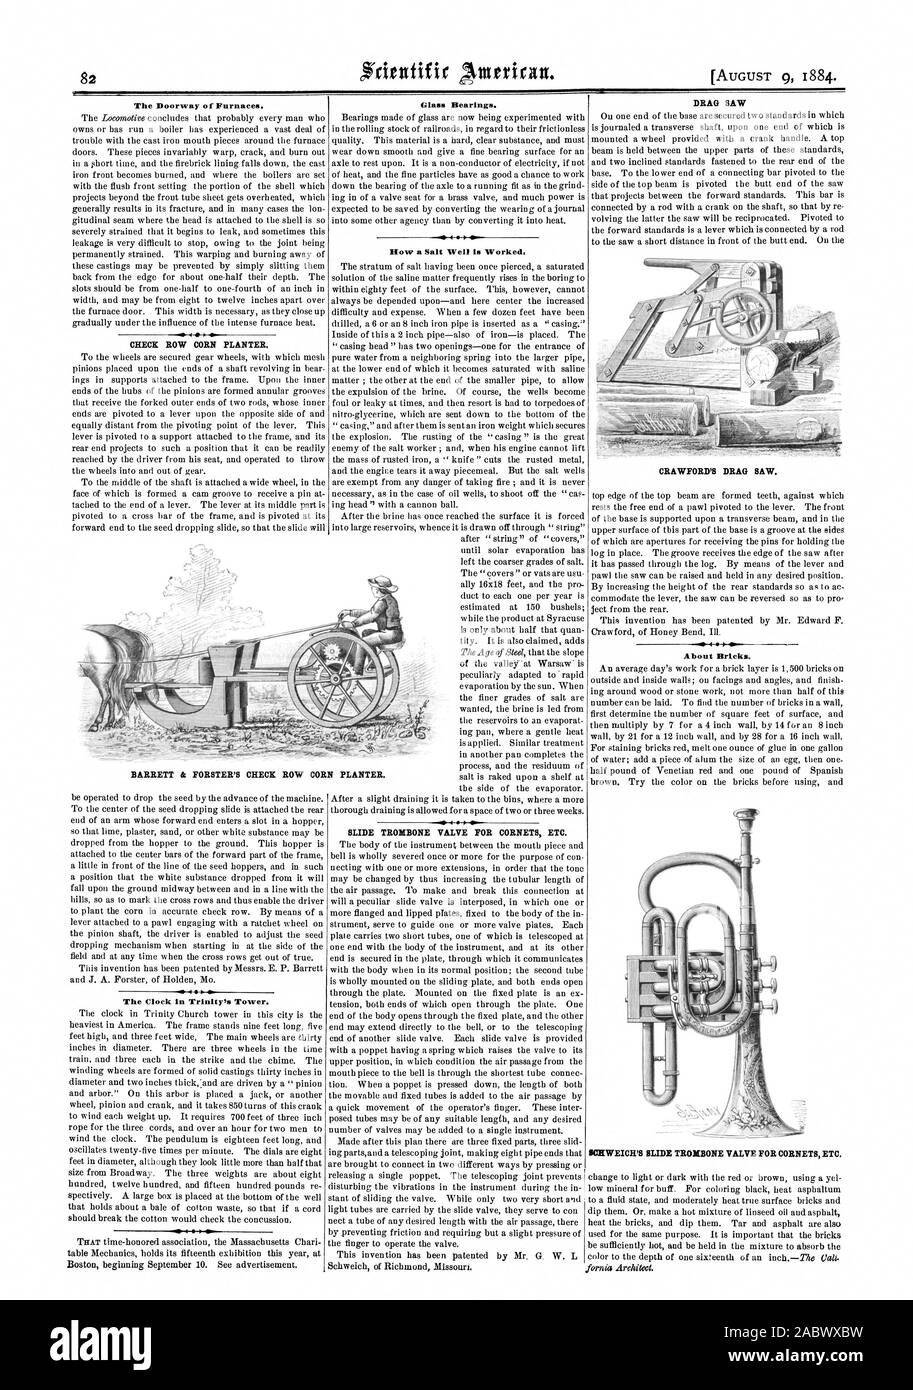 The Doorway of Furnaces. 400 CHECK ROW CORN PLANTER. The Clock in Trinity's Tower. Glass Bearings. How a Salt Well is Worked. SLIDE TROMBONE VALVE FOR CORNETS ETC. DRAG SAW CRAWFORD'S DRAG SAW. SOEWEICH'S SLIDE TROMBONE VALVE FOR CORNETS ETC. BARRETT & FORSTER'S CHECK ROW CORN PLANTER., scientific american, 1884-08-09 Stock Photo